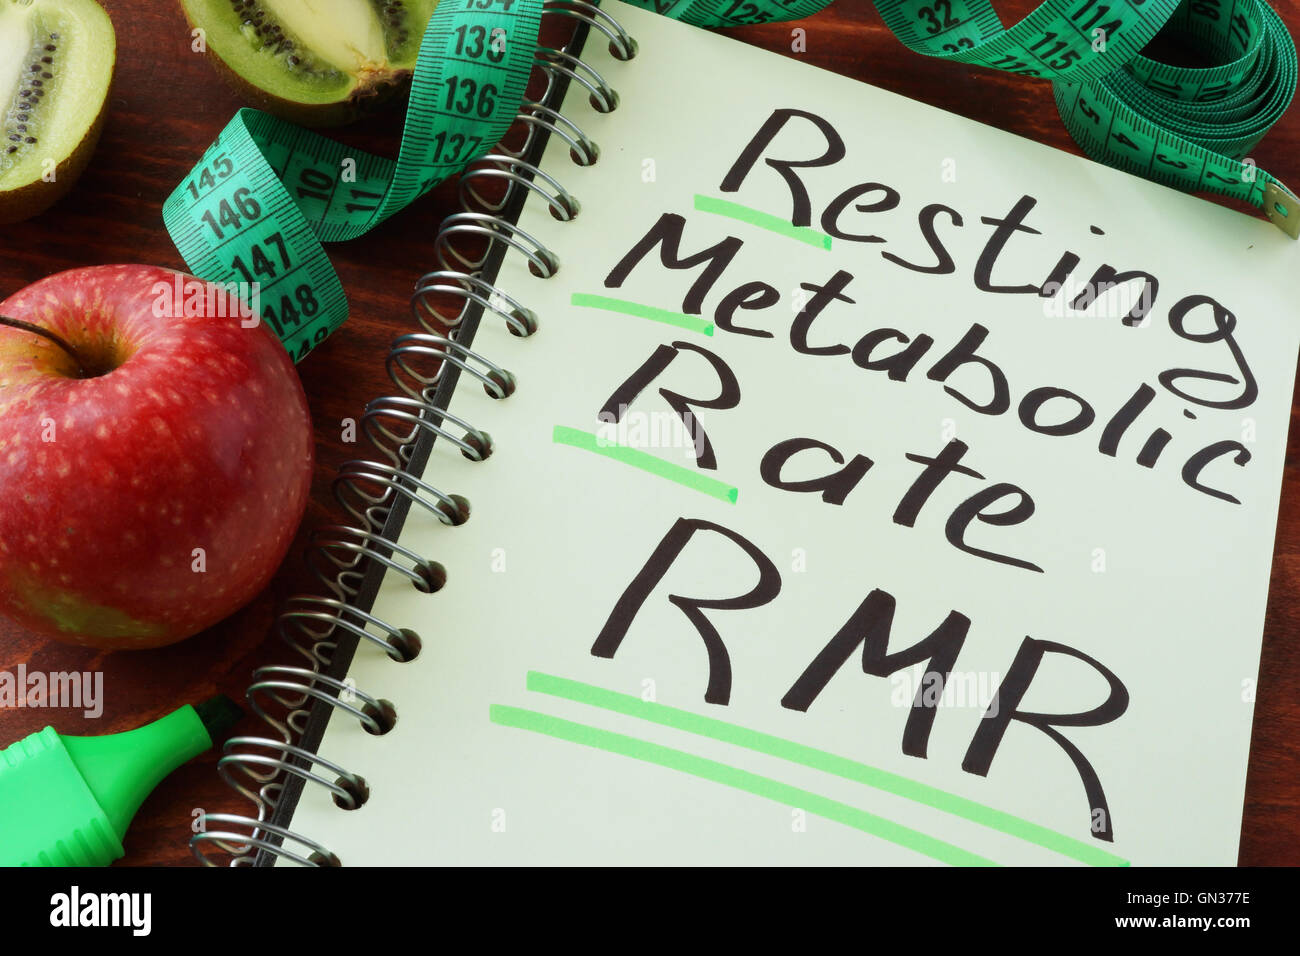 RMR Resting metabolic rate written on a notepad sheet. Stock Photo